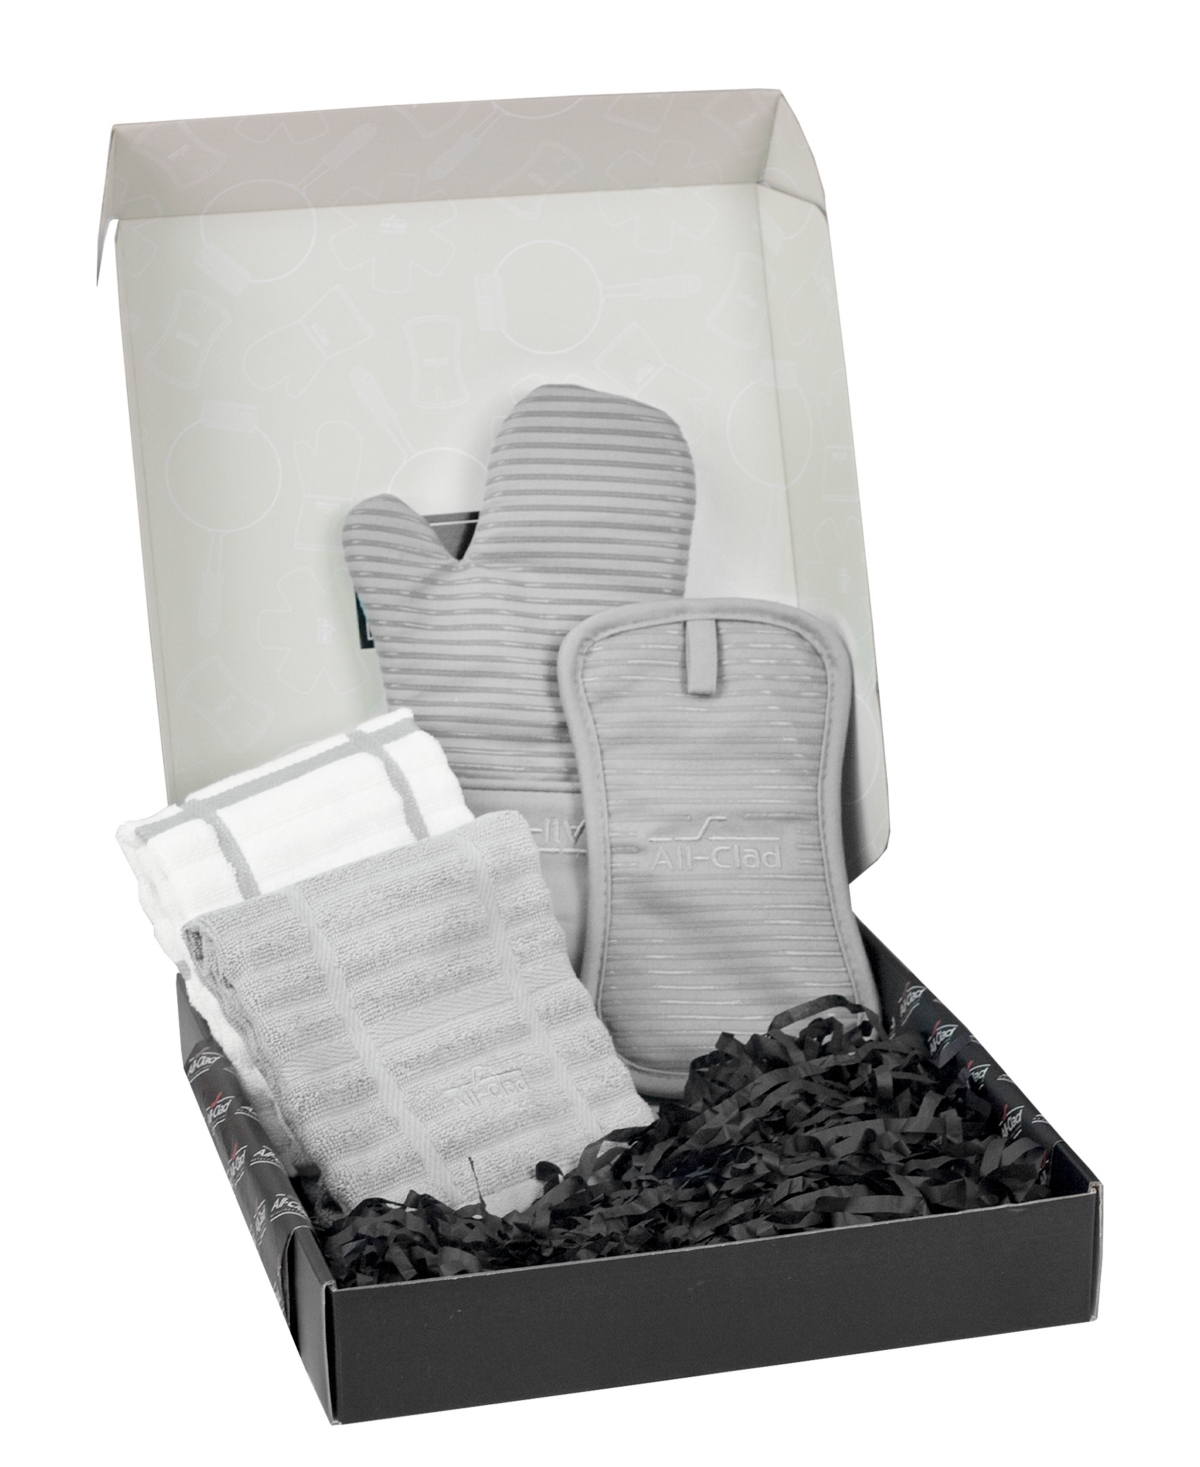 All-clad Foundation Collection 4-piece Gift Set In Titanium